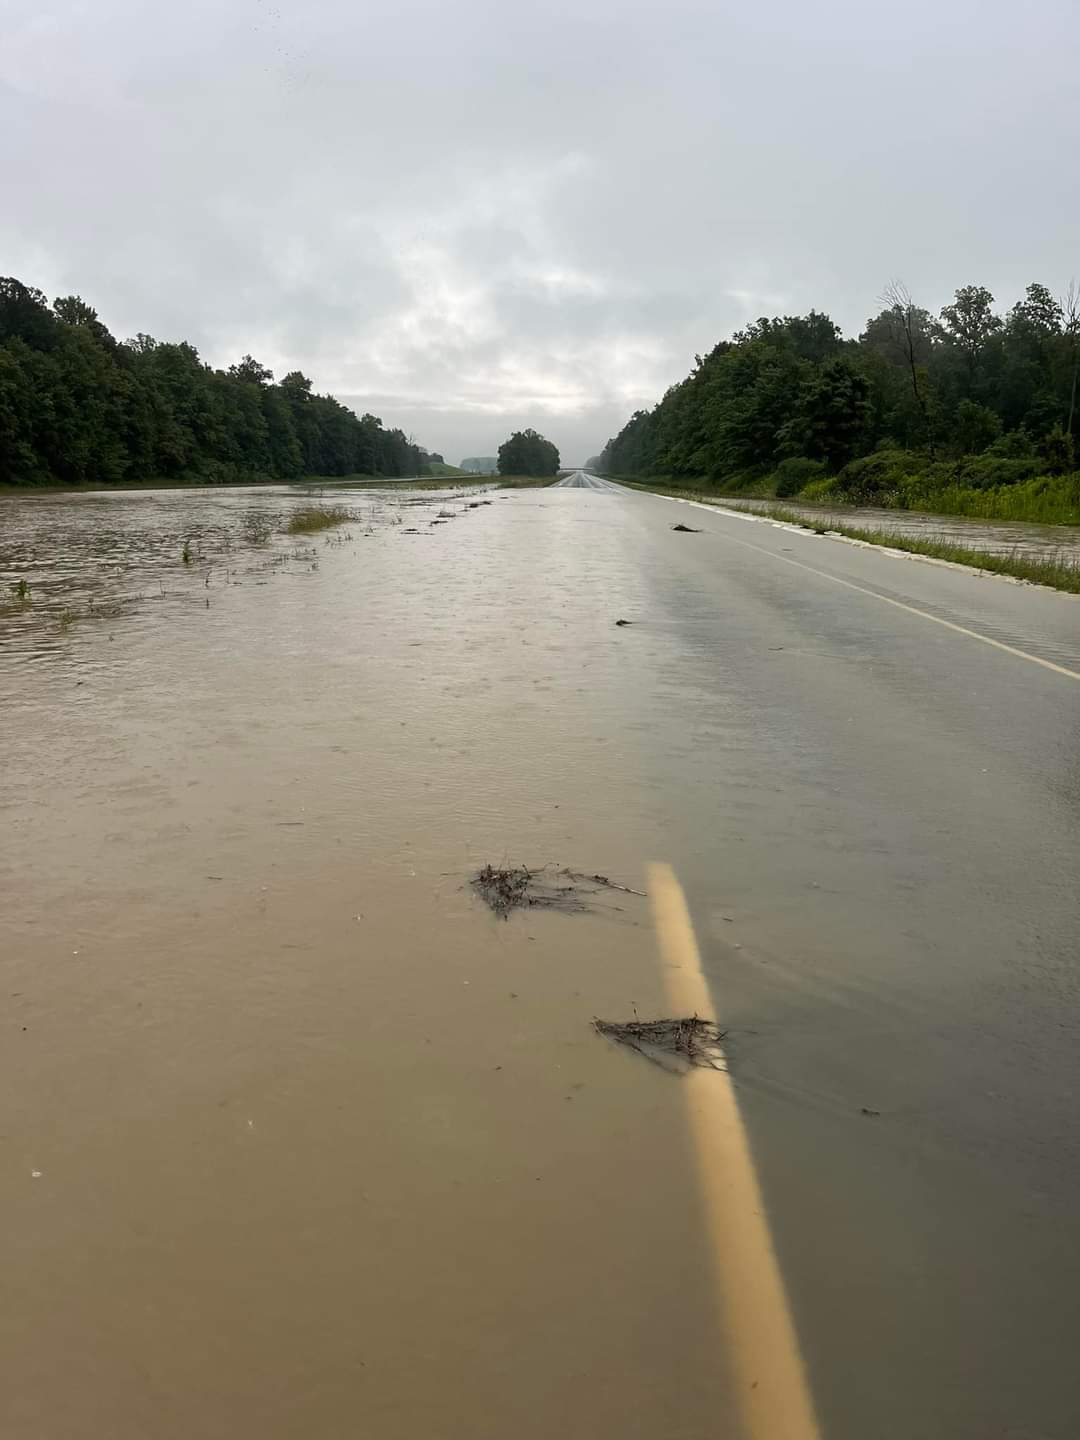 A photo taken by Warwick Fire and Rescue shows the road flooding caused by heavy rain Wednesday.